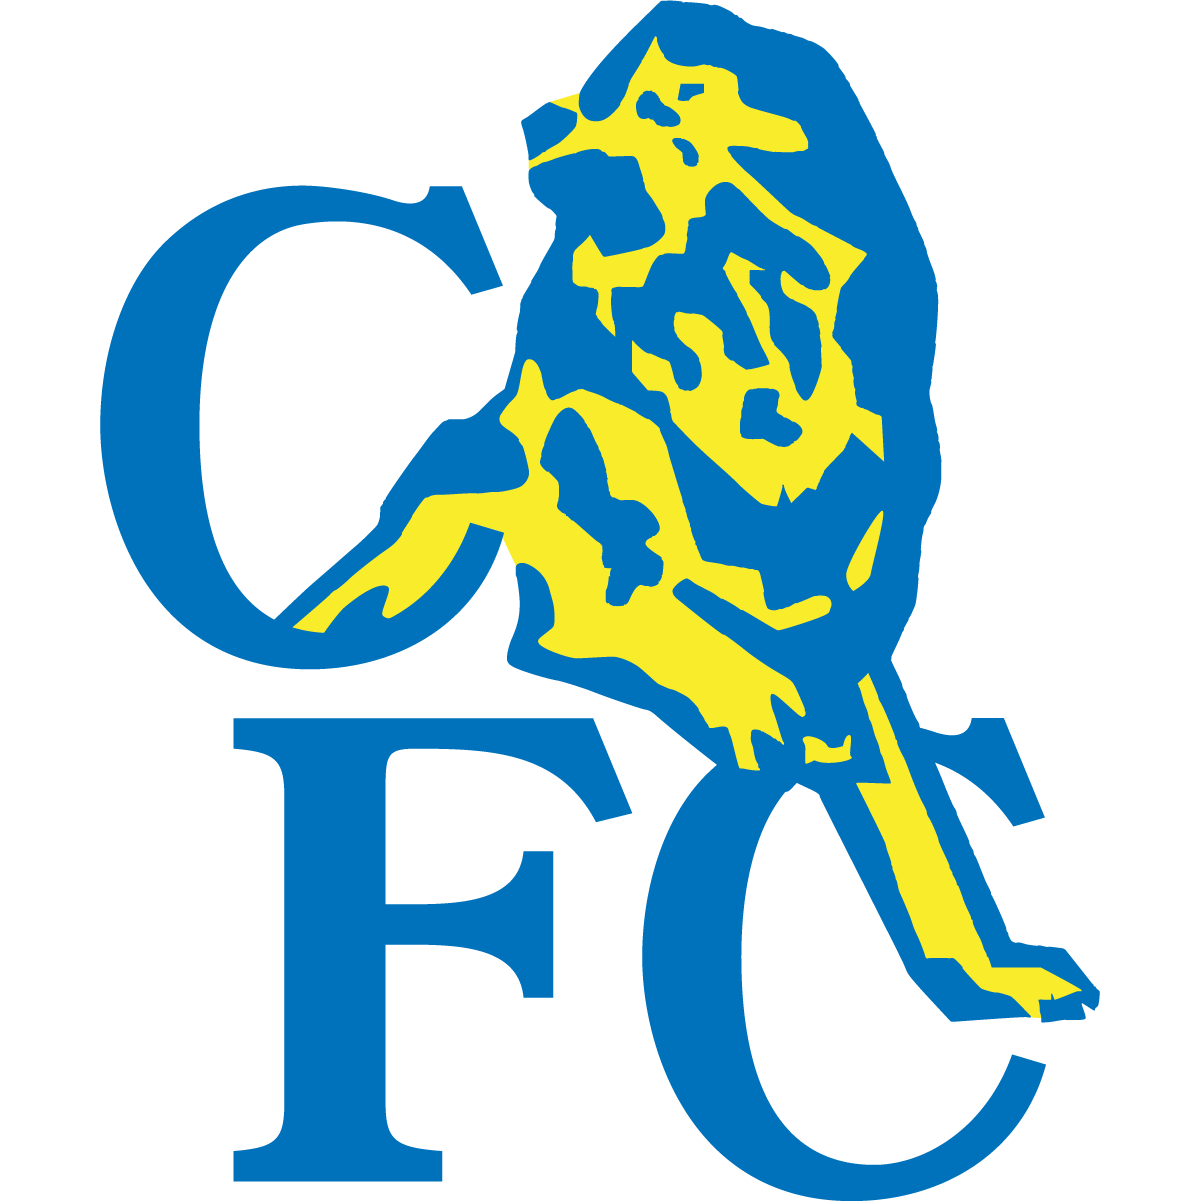 Image - Chelsea FC logo (blue and yellow).png | Logopedia ...